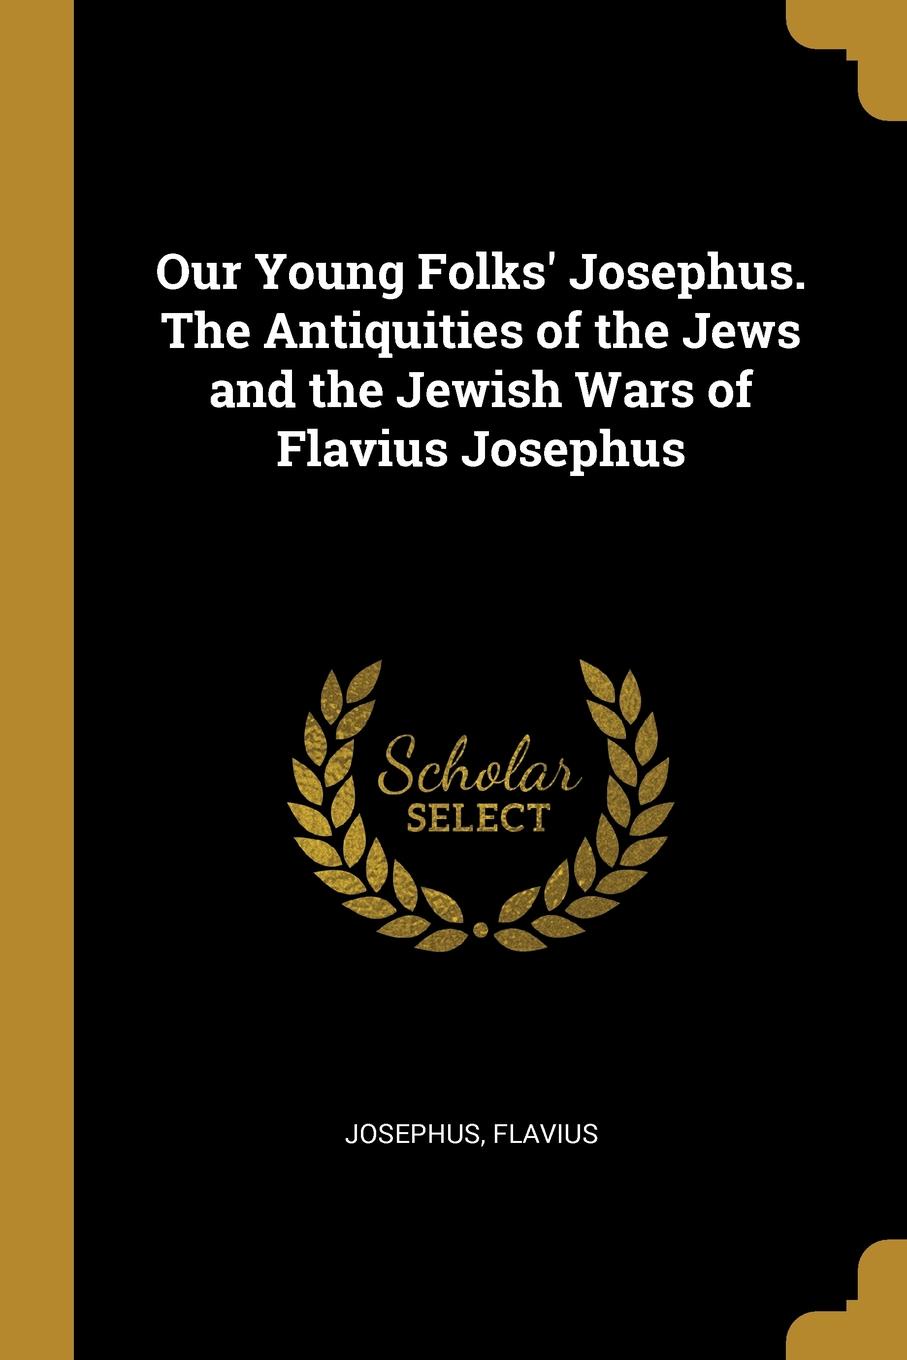 Our Young Folks. Josephus. The Antiquities of the Jews and the Jewish Wars of Flavius Josephus